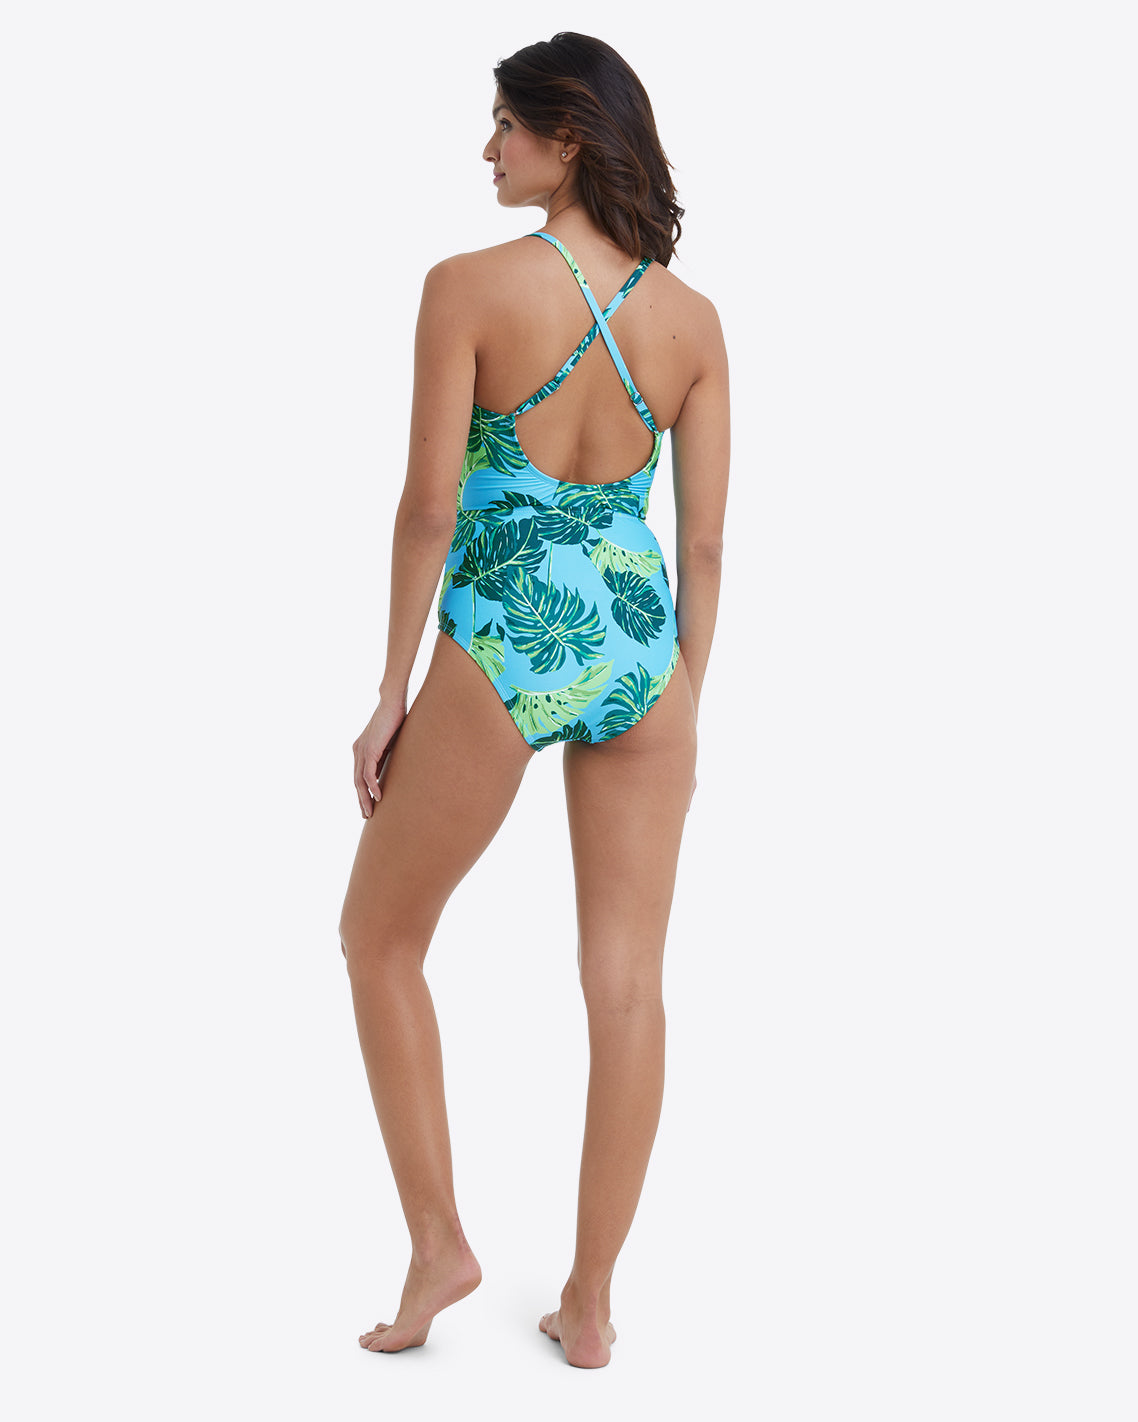 One Piece Swimsuit and Cover Up Set Size 3x